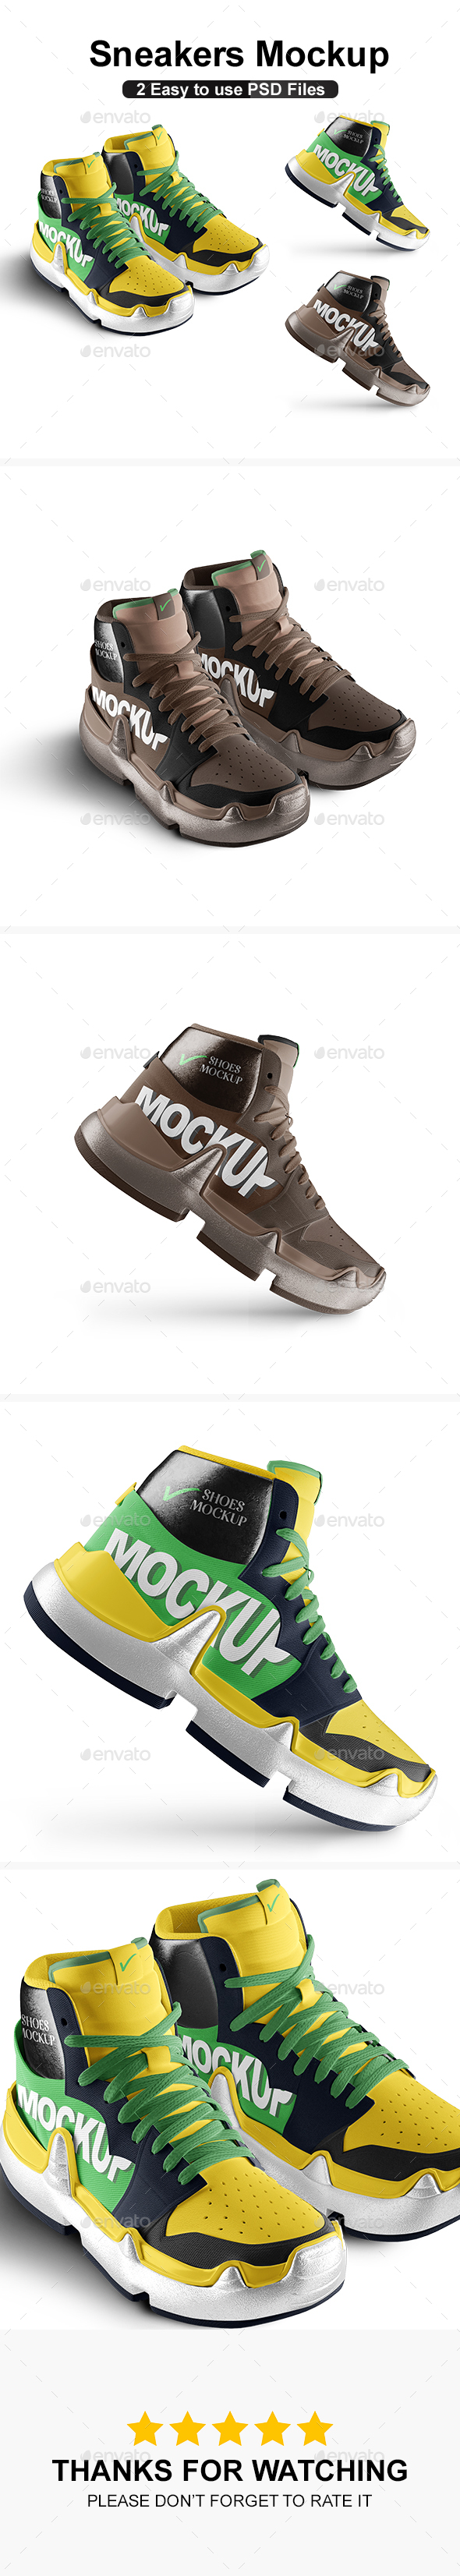 [DOWNLOAD]Sneakers Shoes Mockup